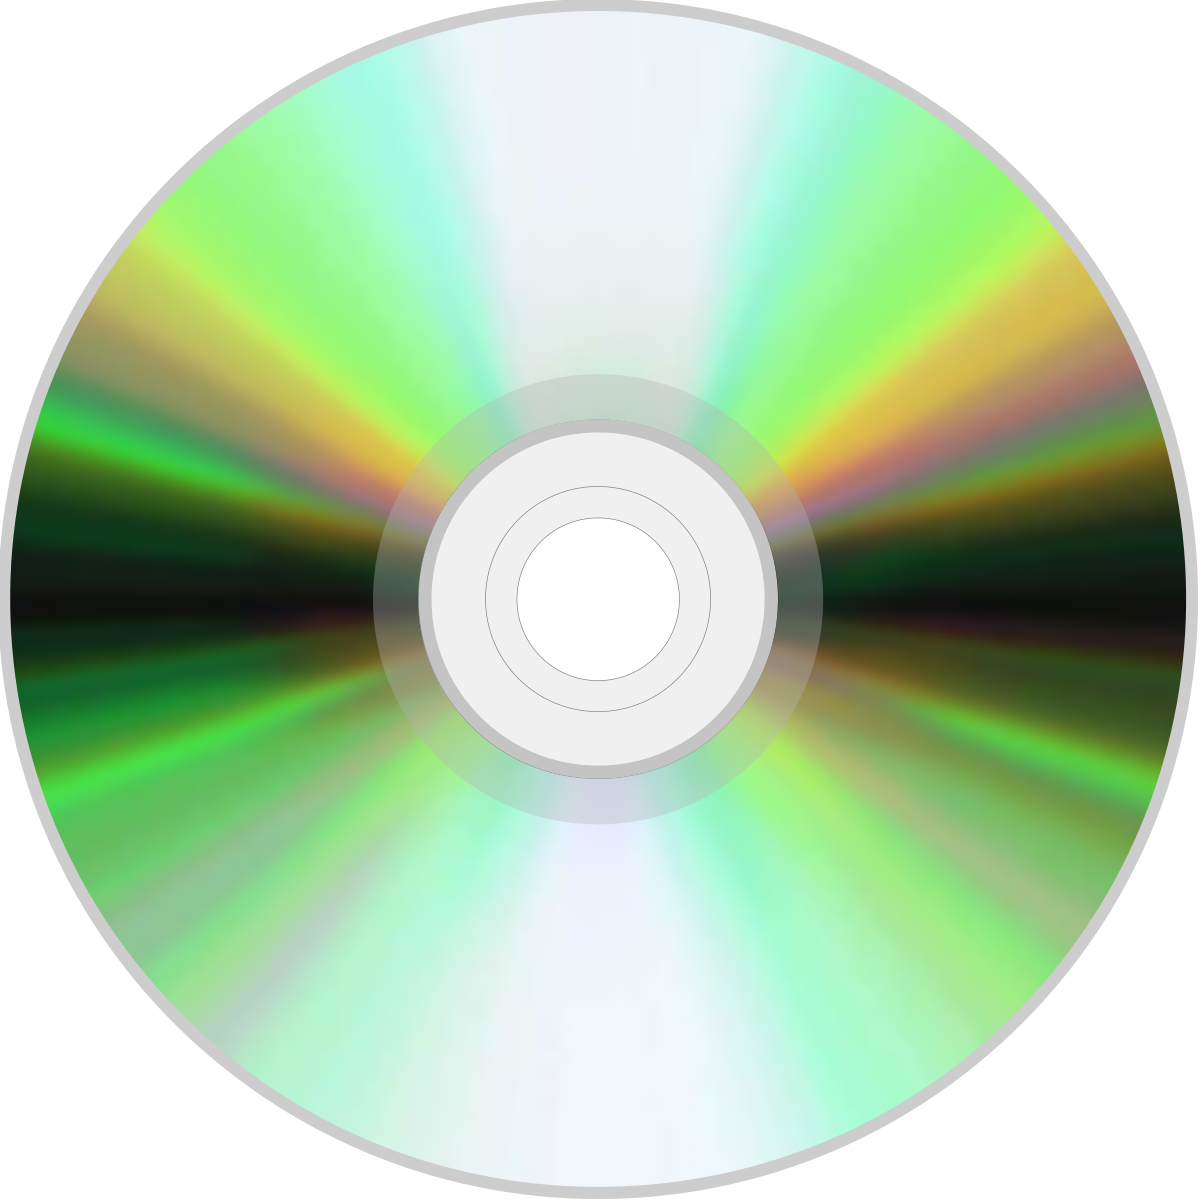 1200px-OD_Compact_disc.svg